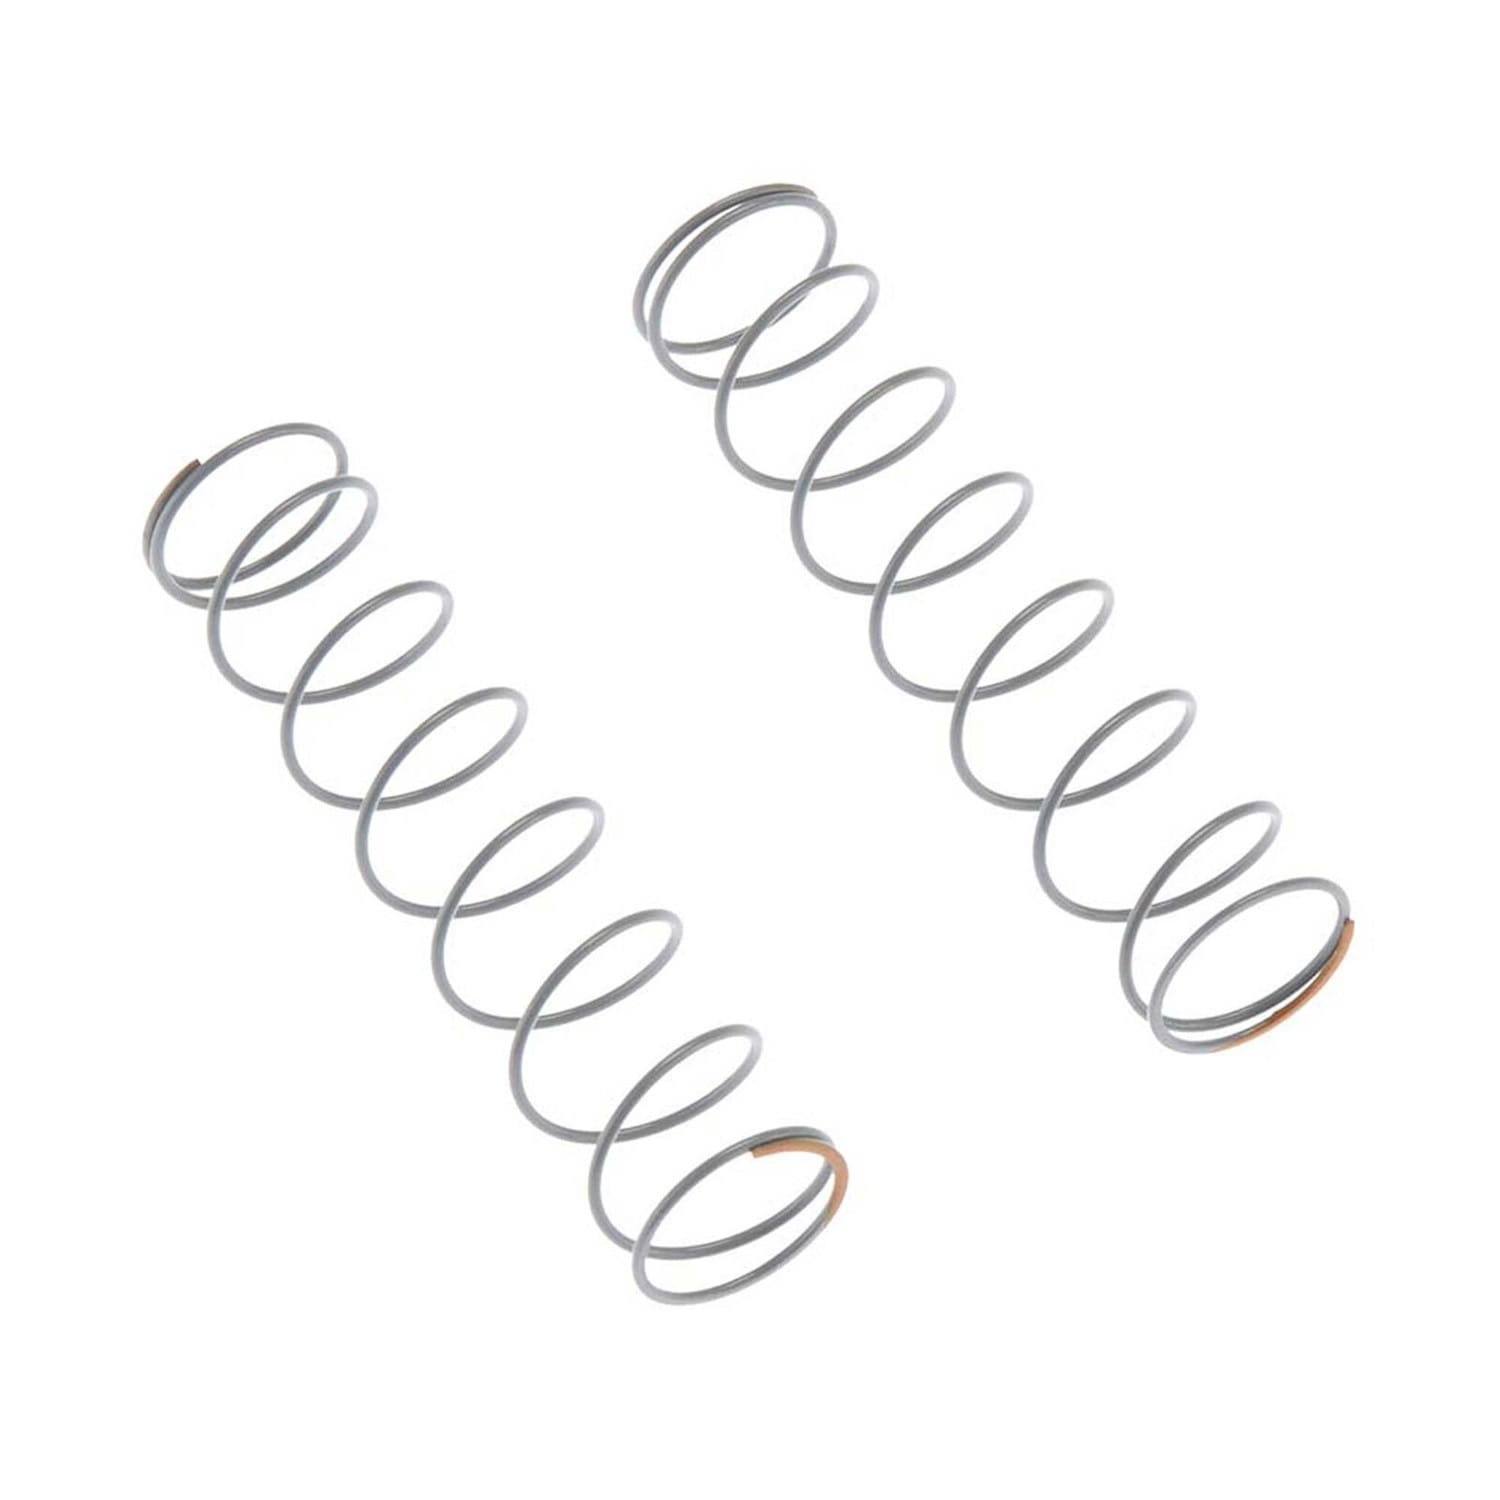 Axial Spring 14x70mm 1.75lbs/in Orange (2)